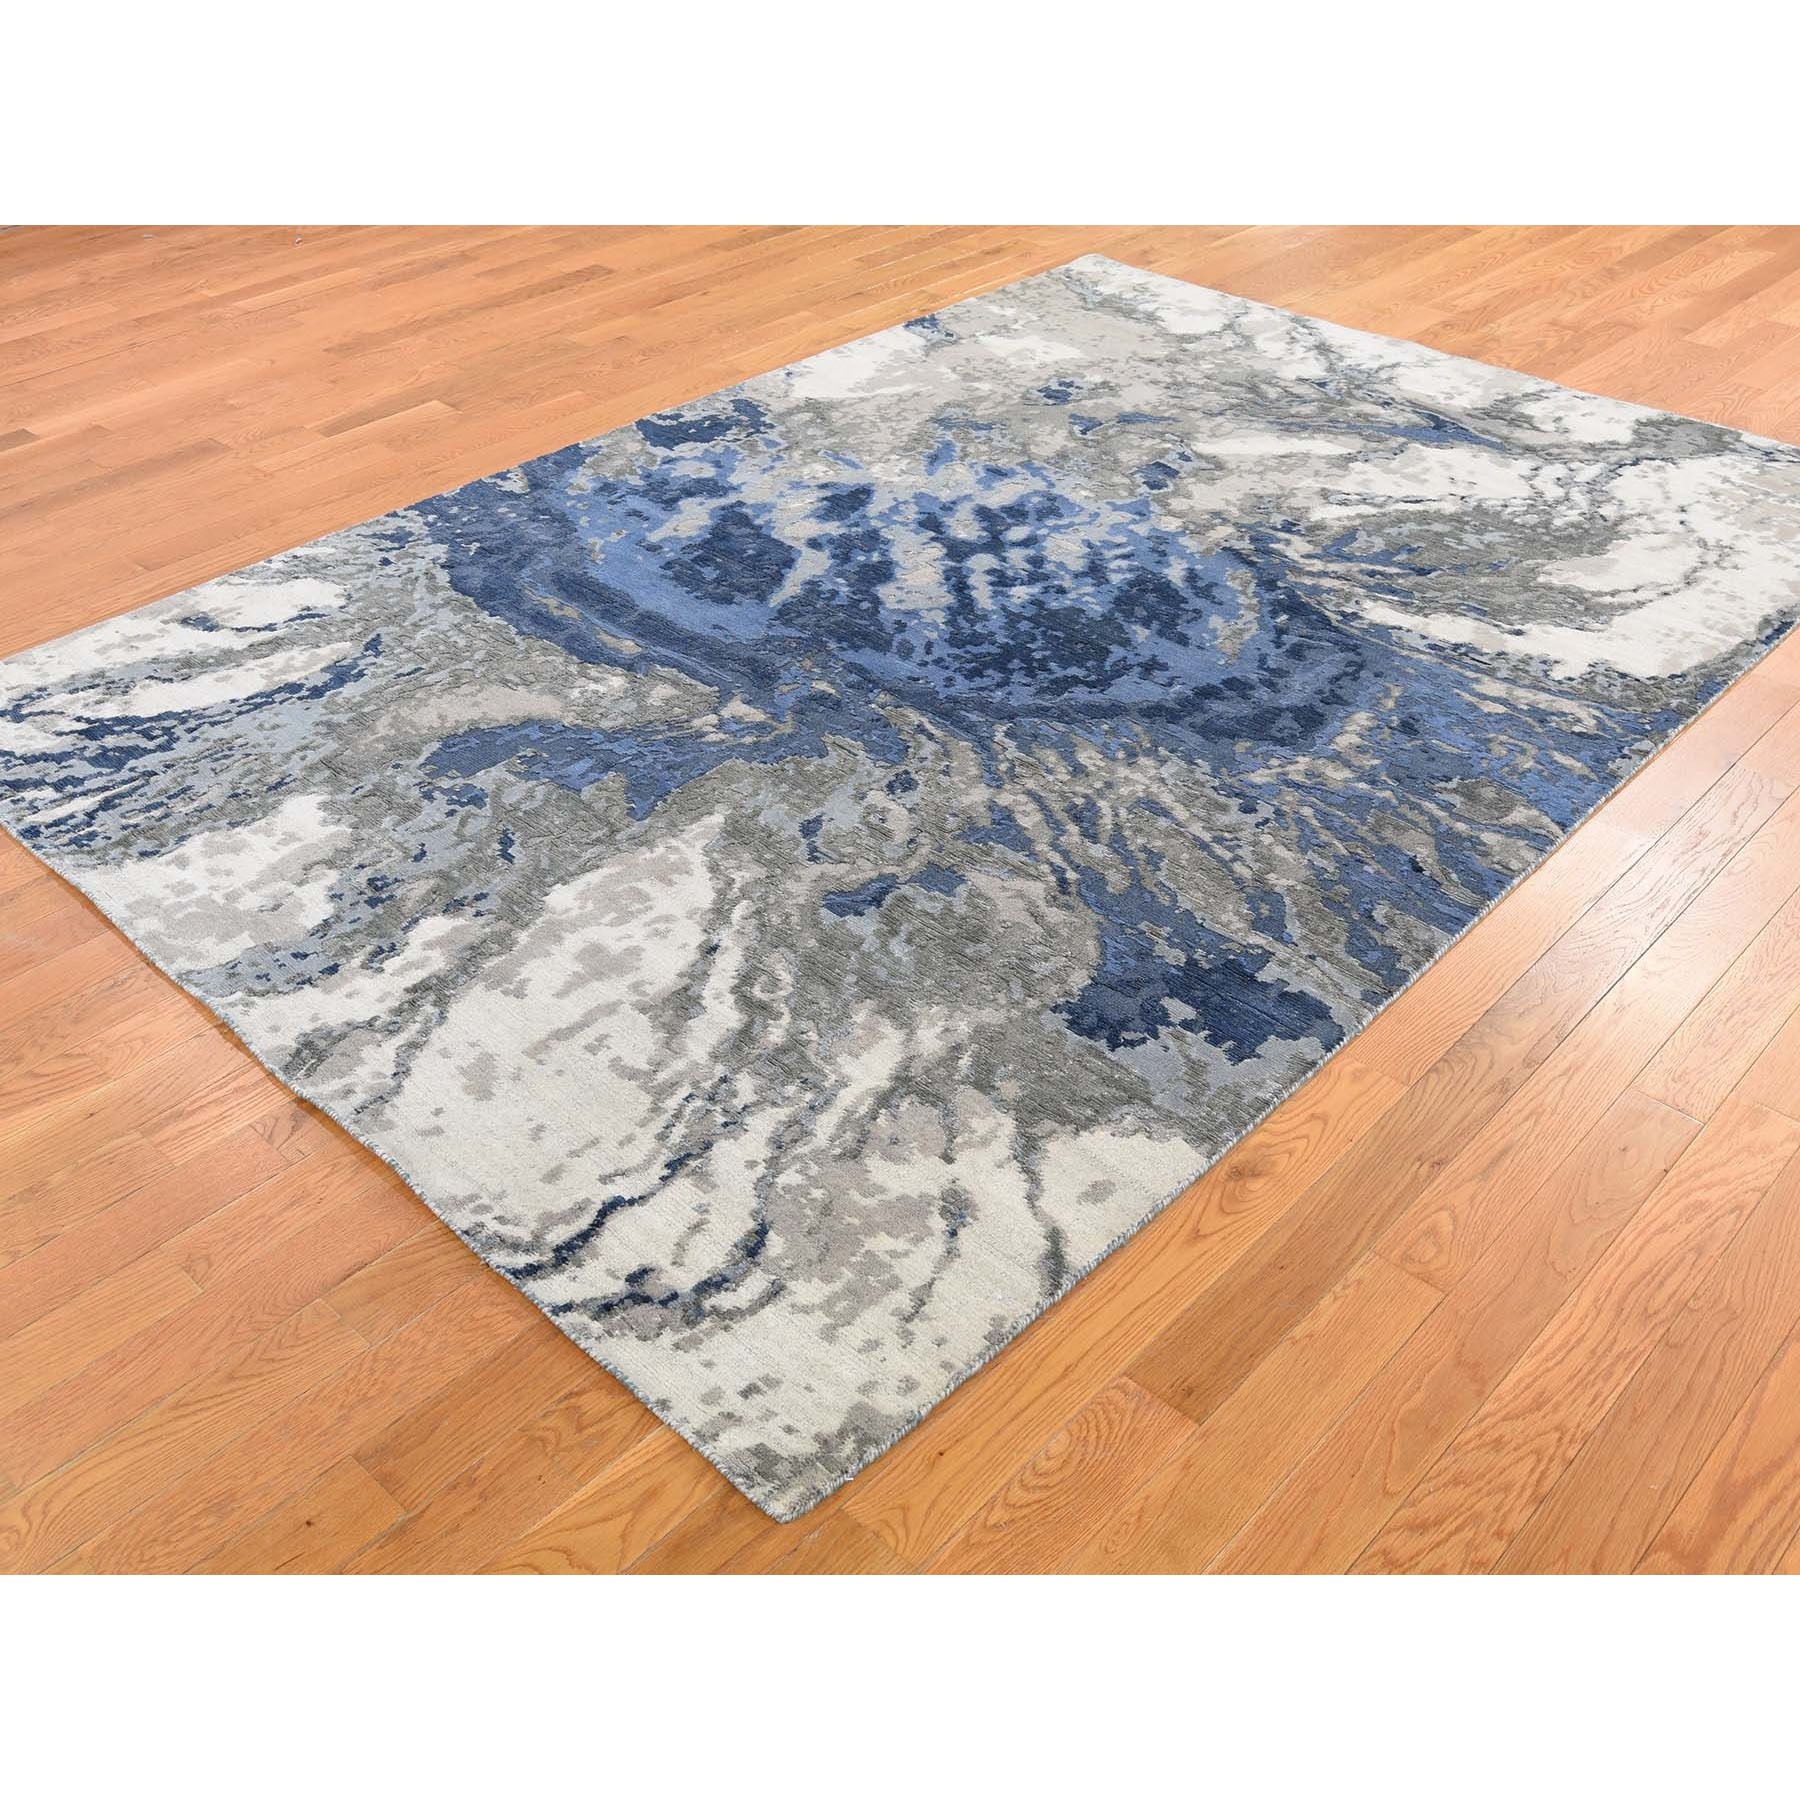 6-x9- Abstract Design Wool and Silk Hi-low Pile Hand Knotted Oriental Rug 